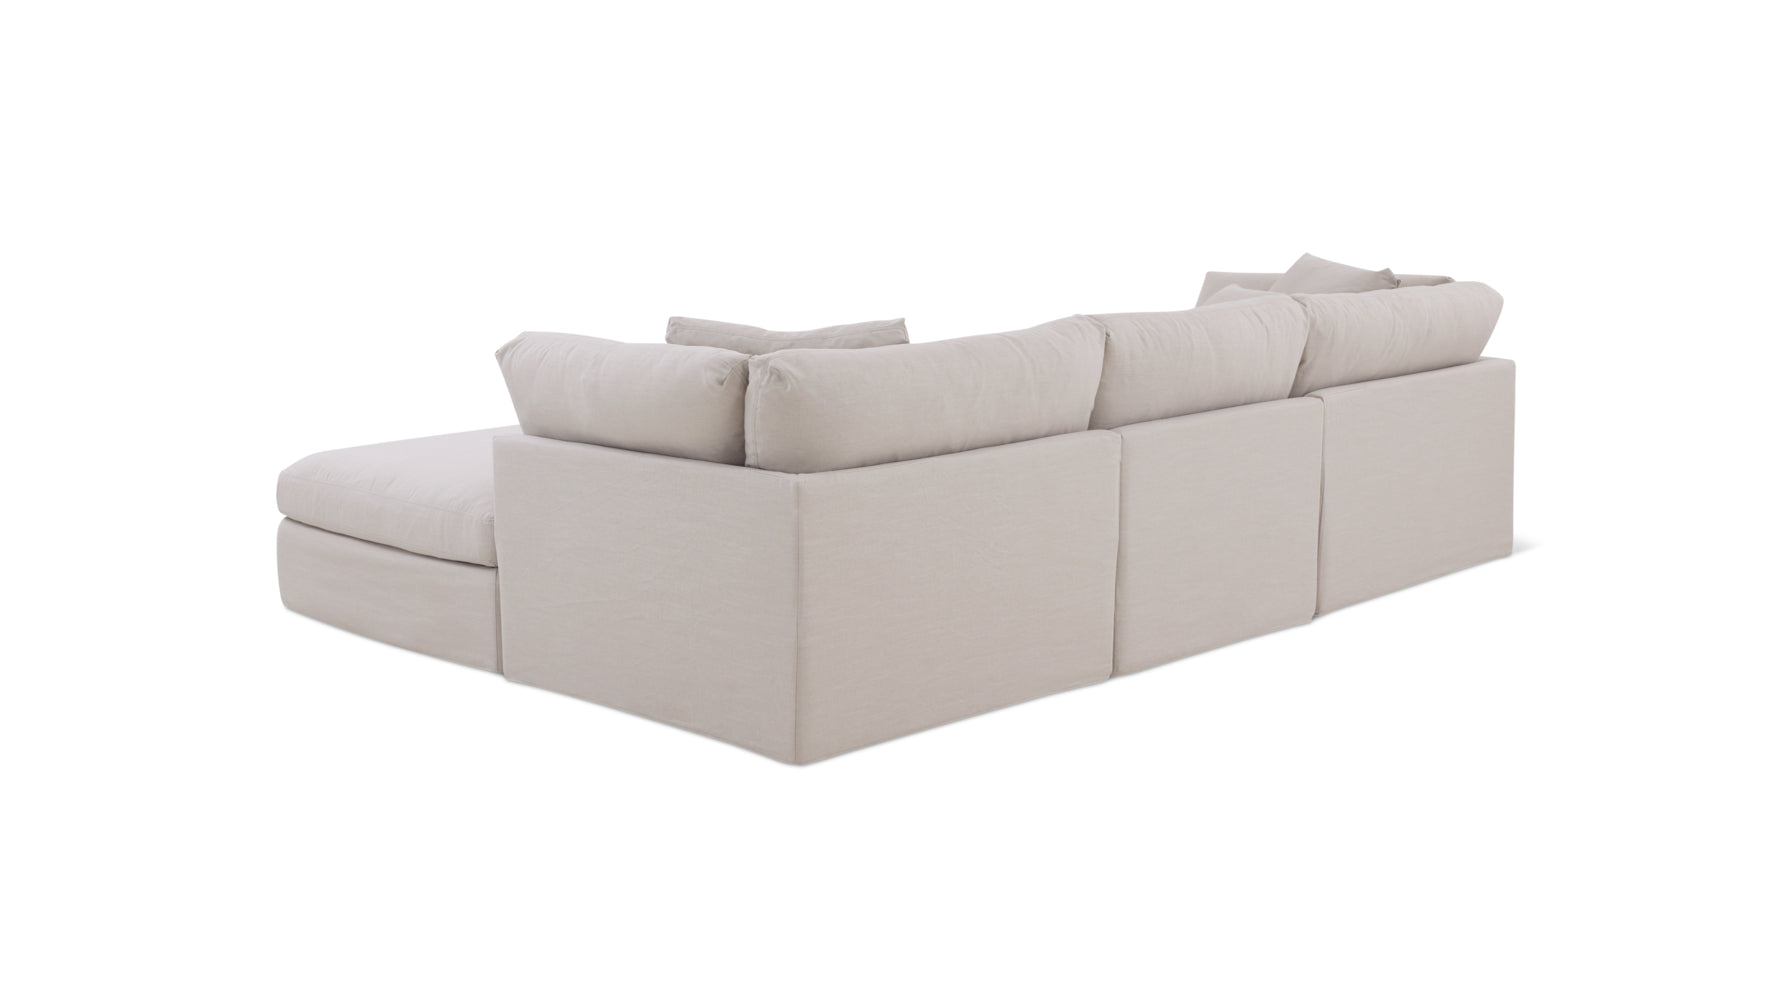 Get Together™ 4-Piece Modular Sectional, Large, Clay - Image 9